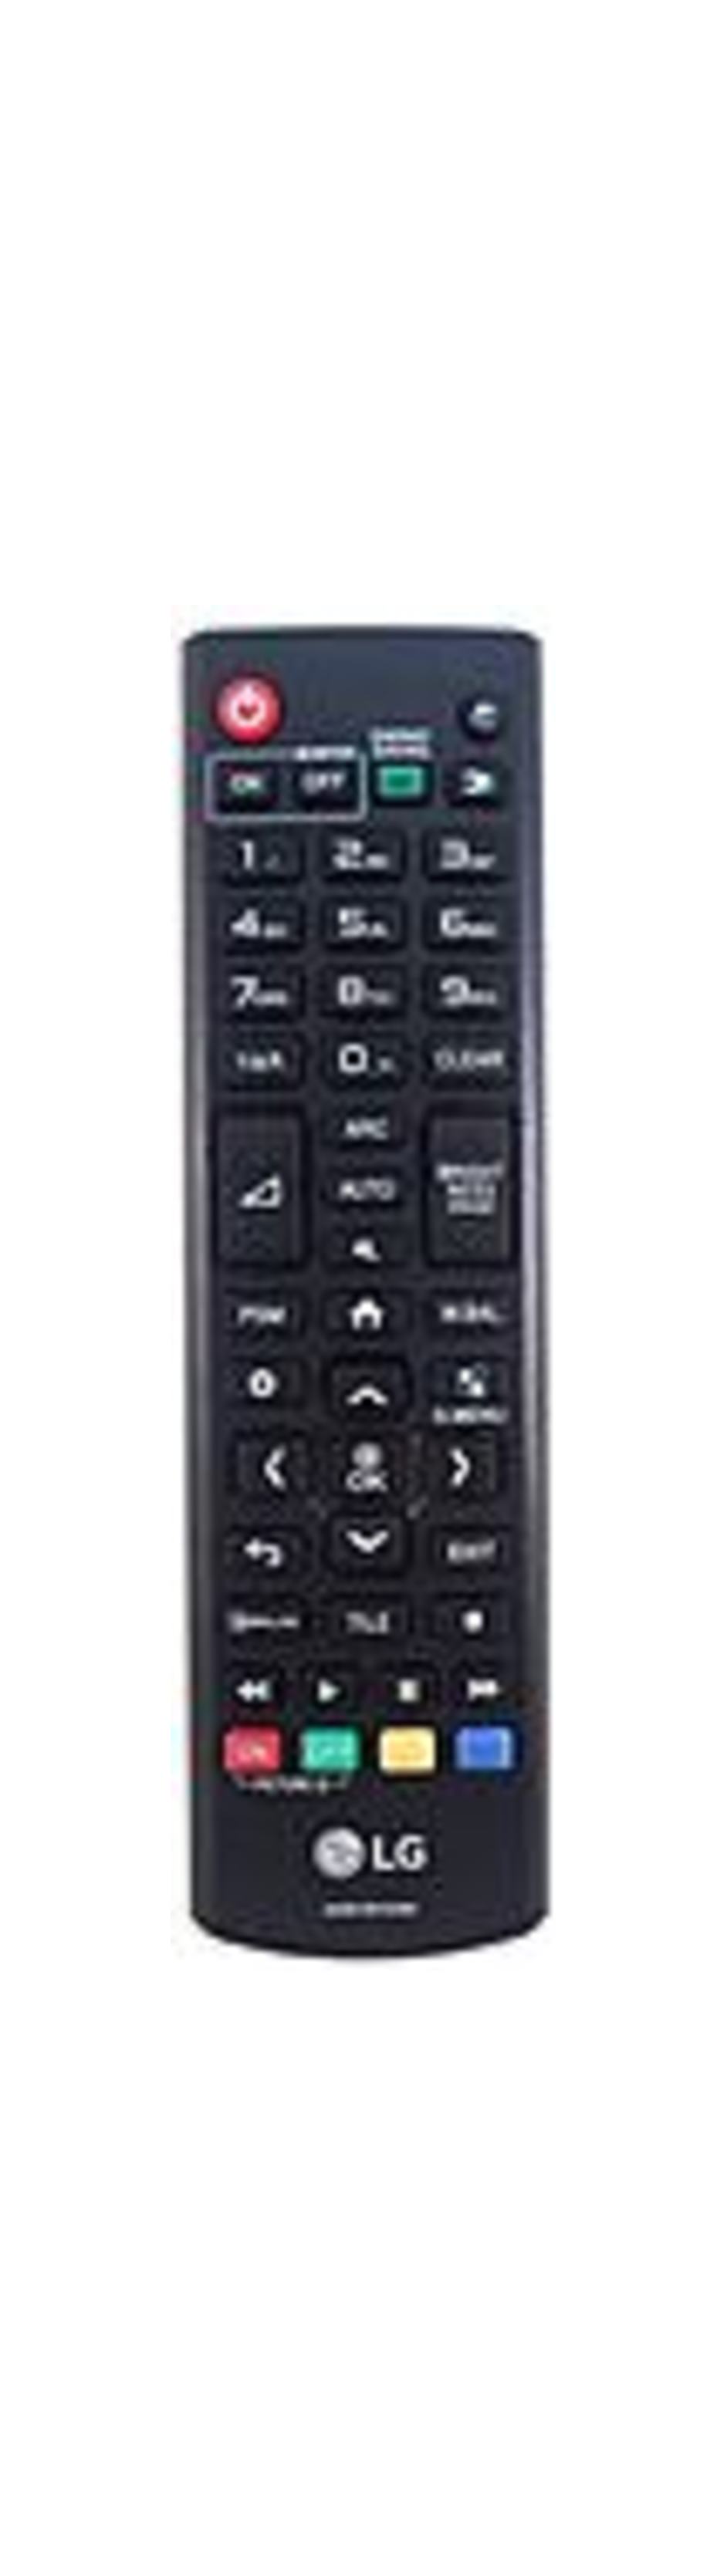 Remote Control for 43LH5700 Smart LED TV - 2 x AAA Battery Required - LG Electronics AKB74915384